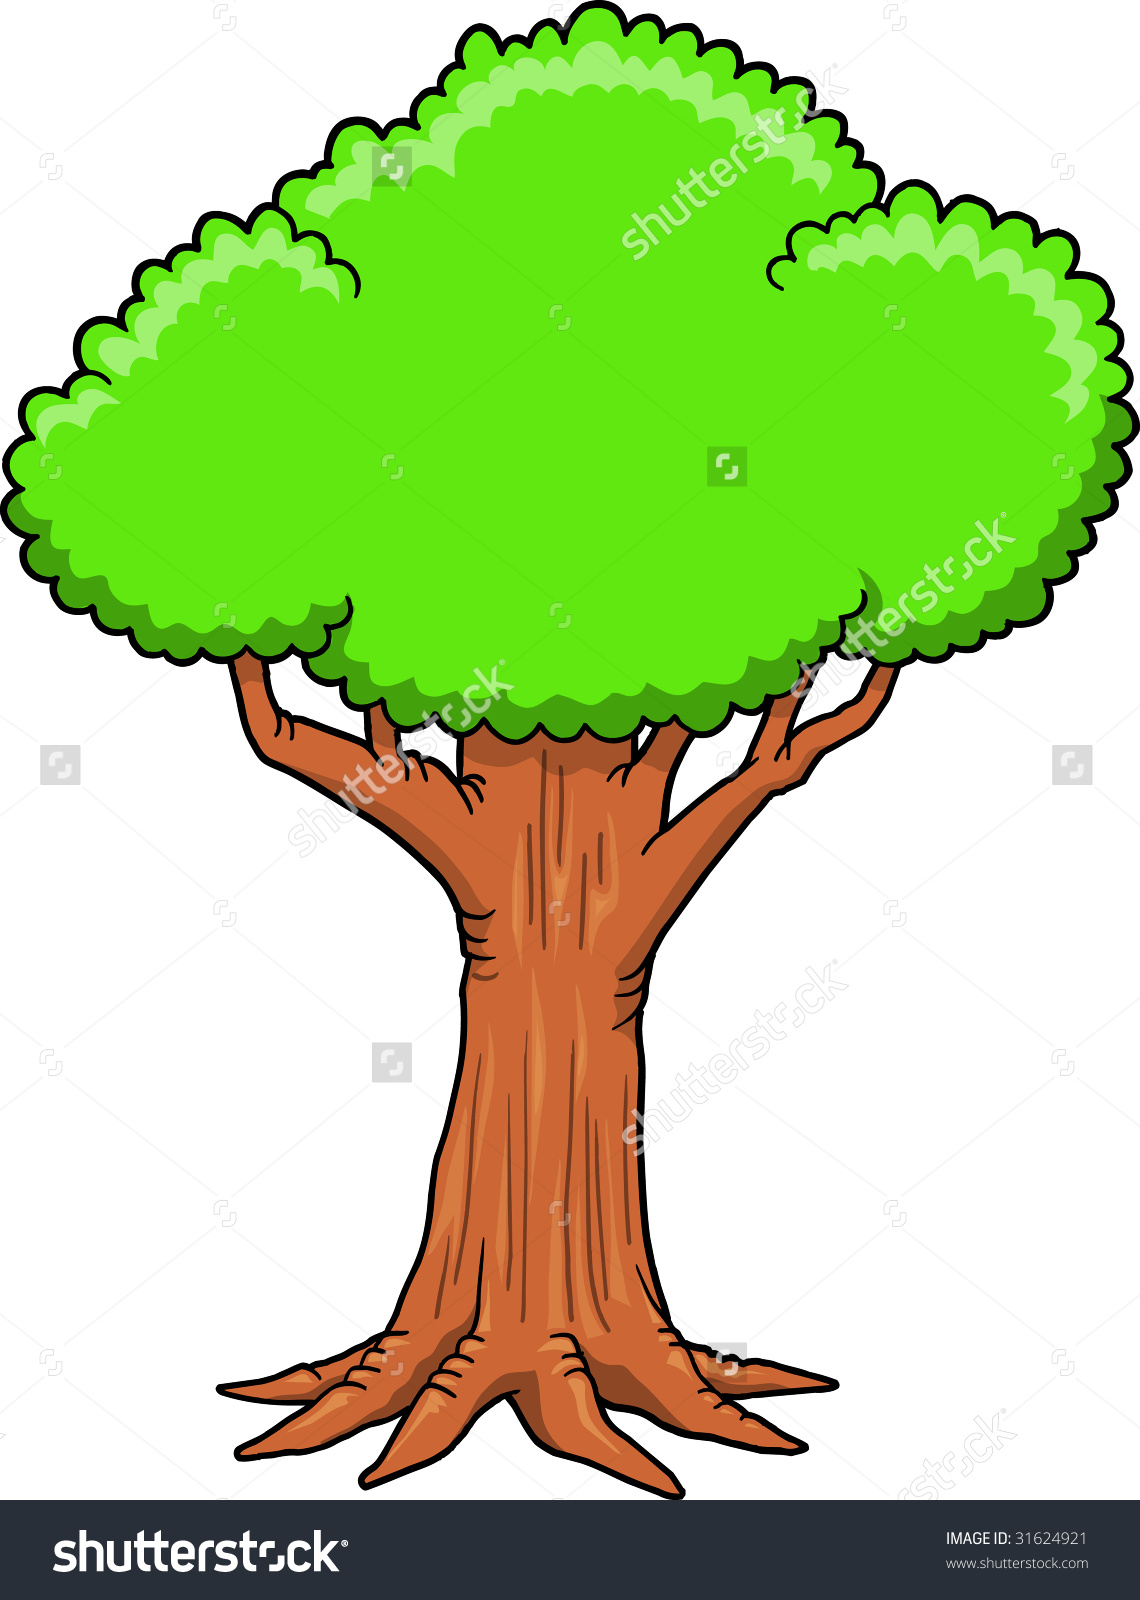 Big trees clipart - Clipground